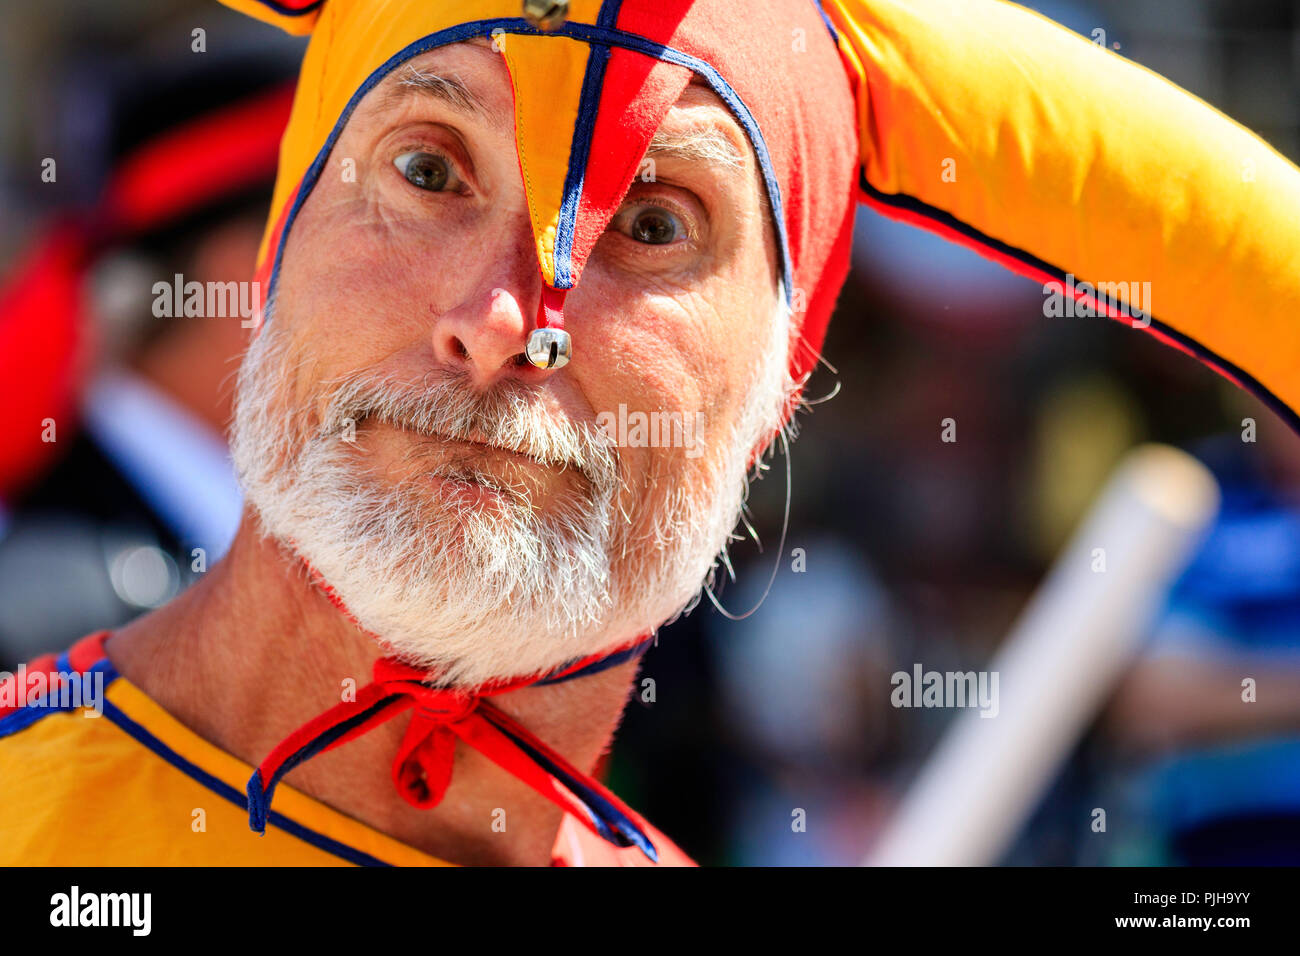 Mature man in orange and yellow medieval costume, court jester, clown. Close up of face, as he looks directly at viewer, eye contact, grey beard. Stock Photo